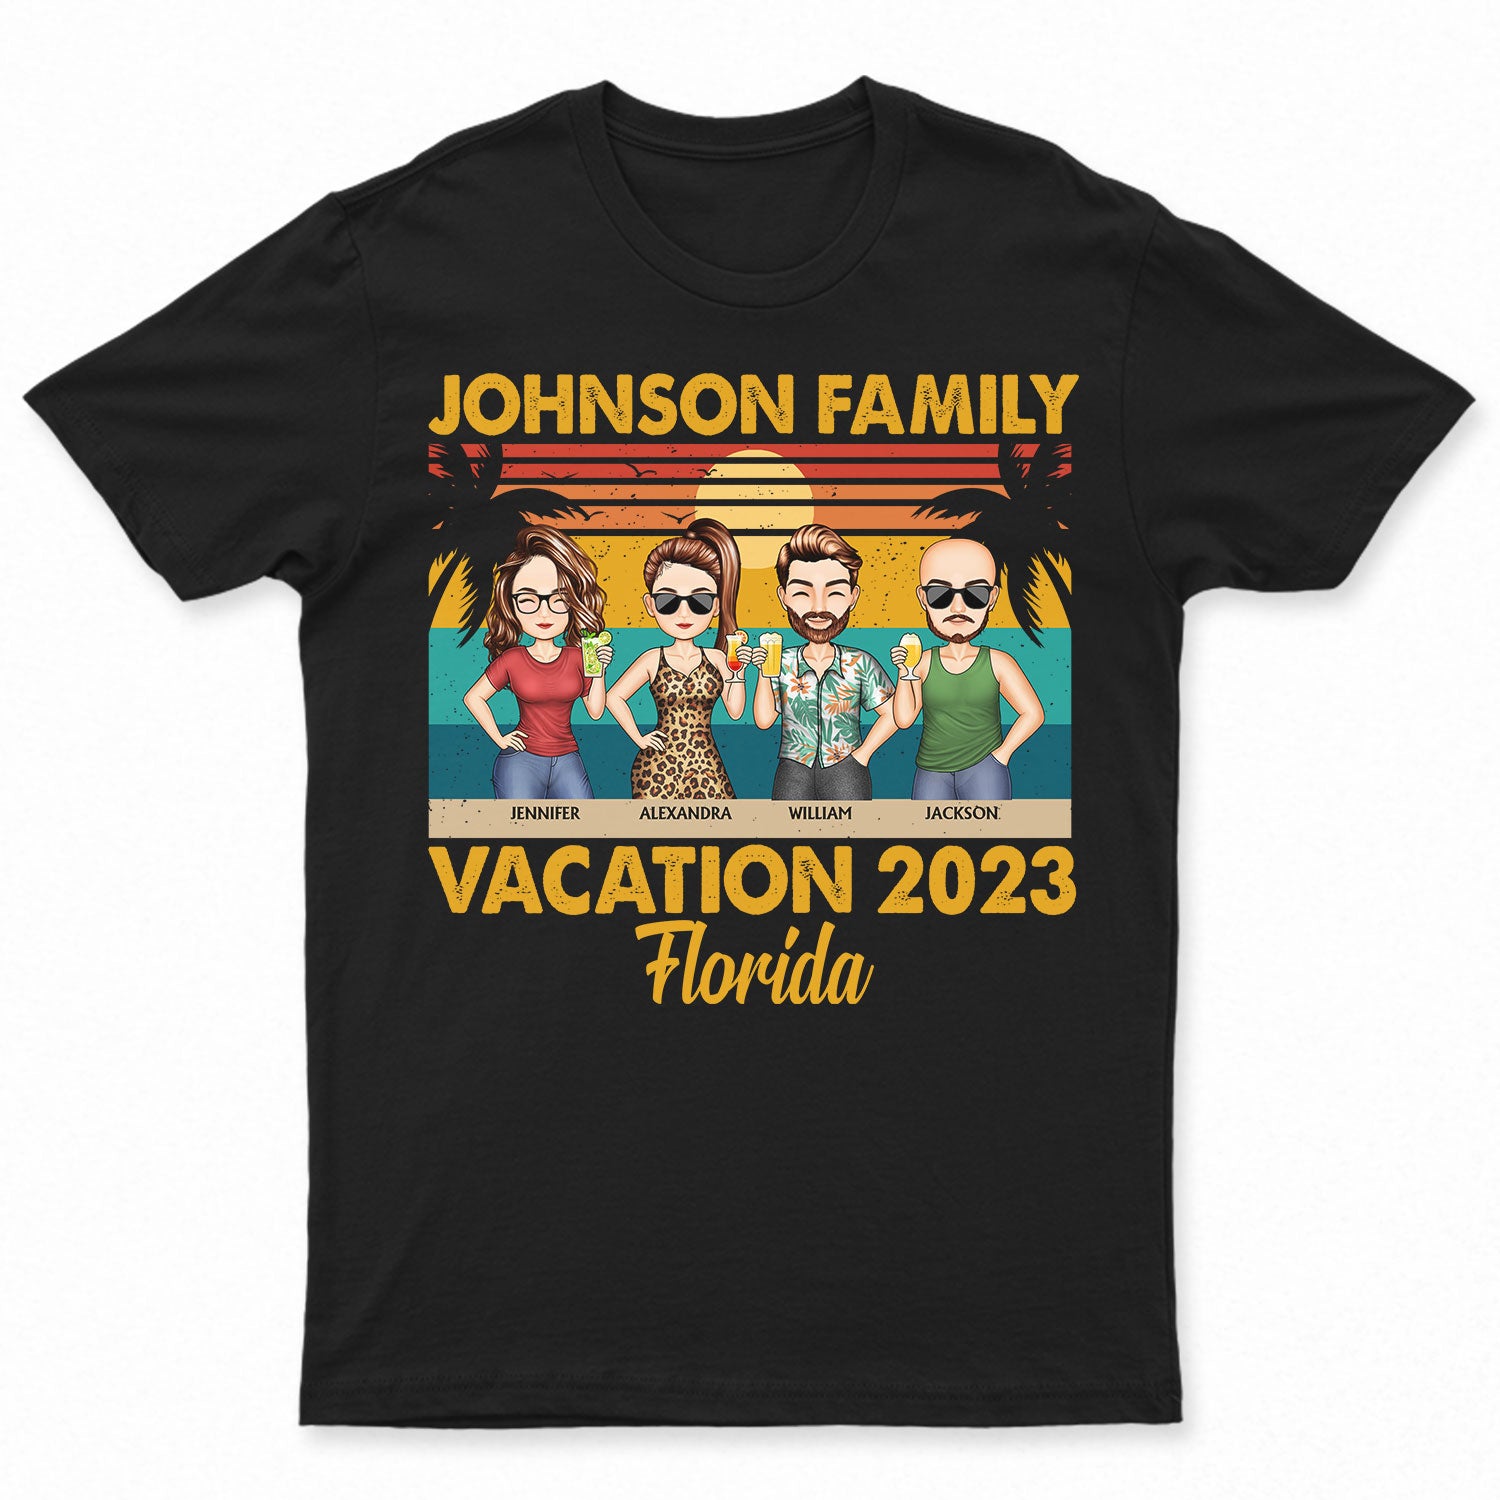 Vacation Traveling Beach - Funny, Holiday Gift For Husband, Wife, Couples, Family - Personalized Custom T Shirt